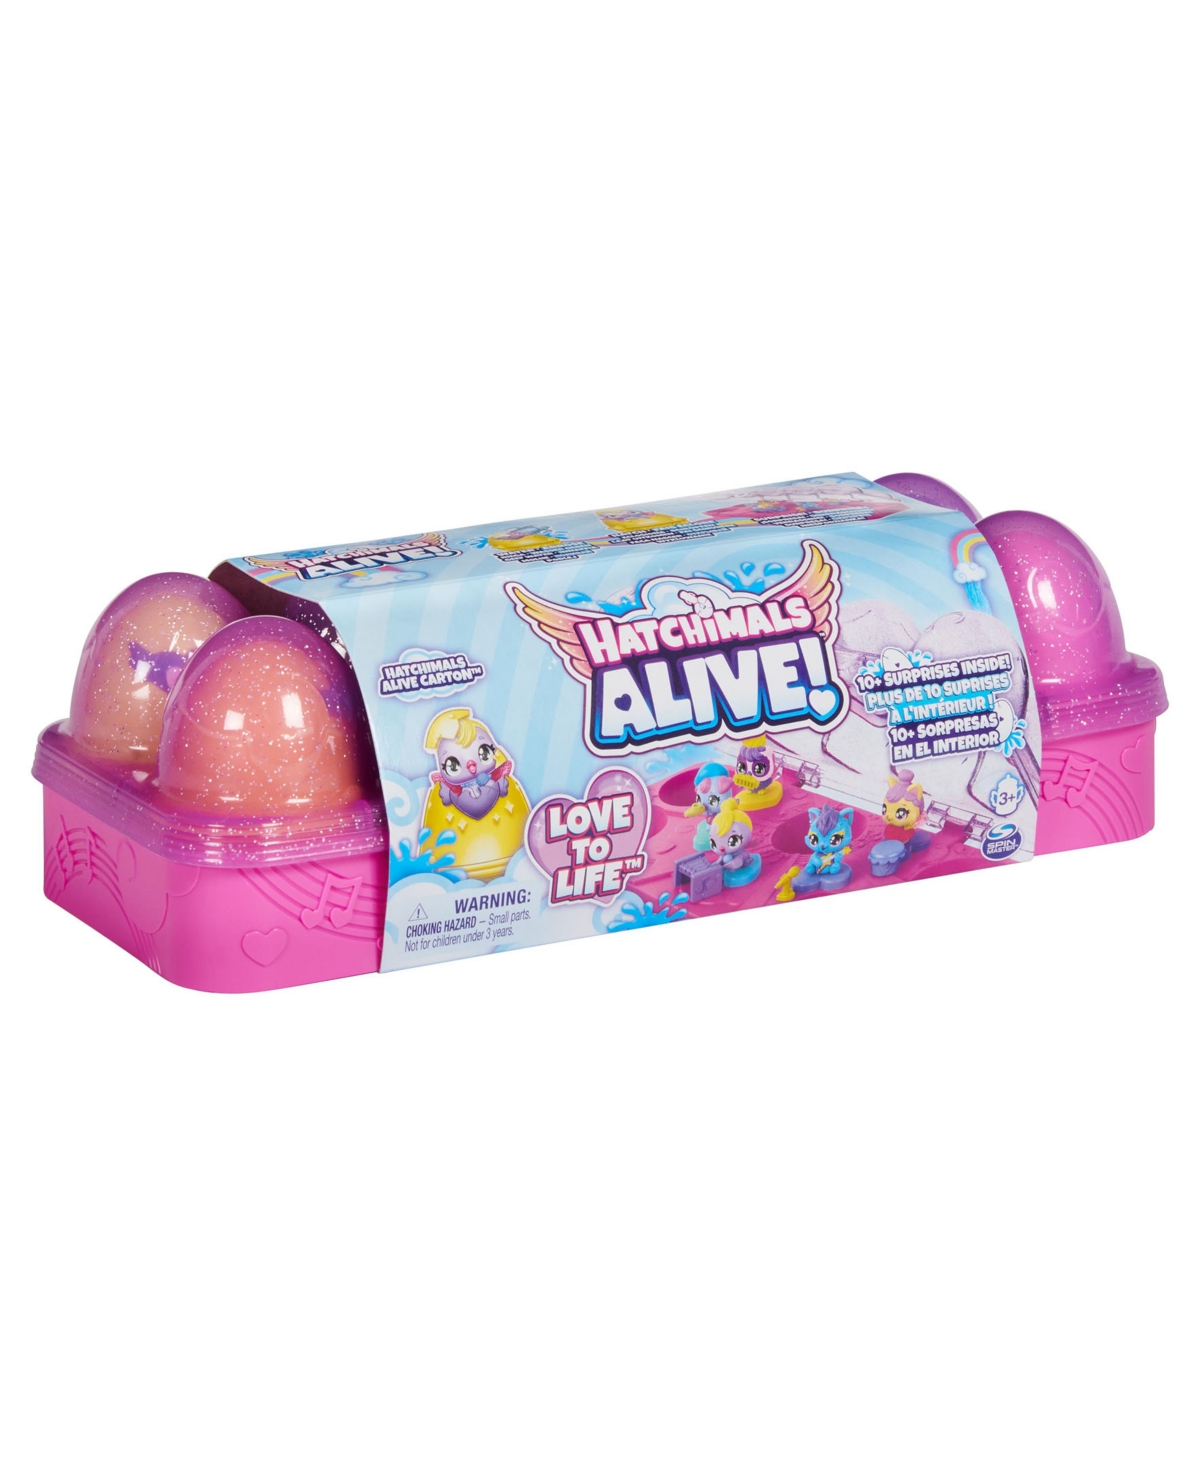 Hatchimals Kids' Alive, Egg Carton Toy With 5 Mini Figures In Self-hatching Eggs In Multi-color